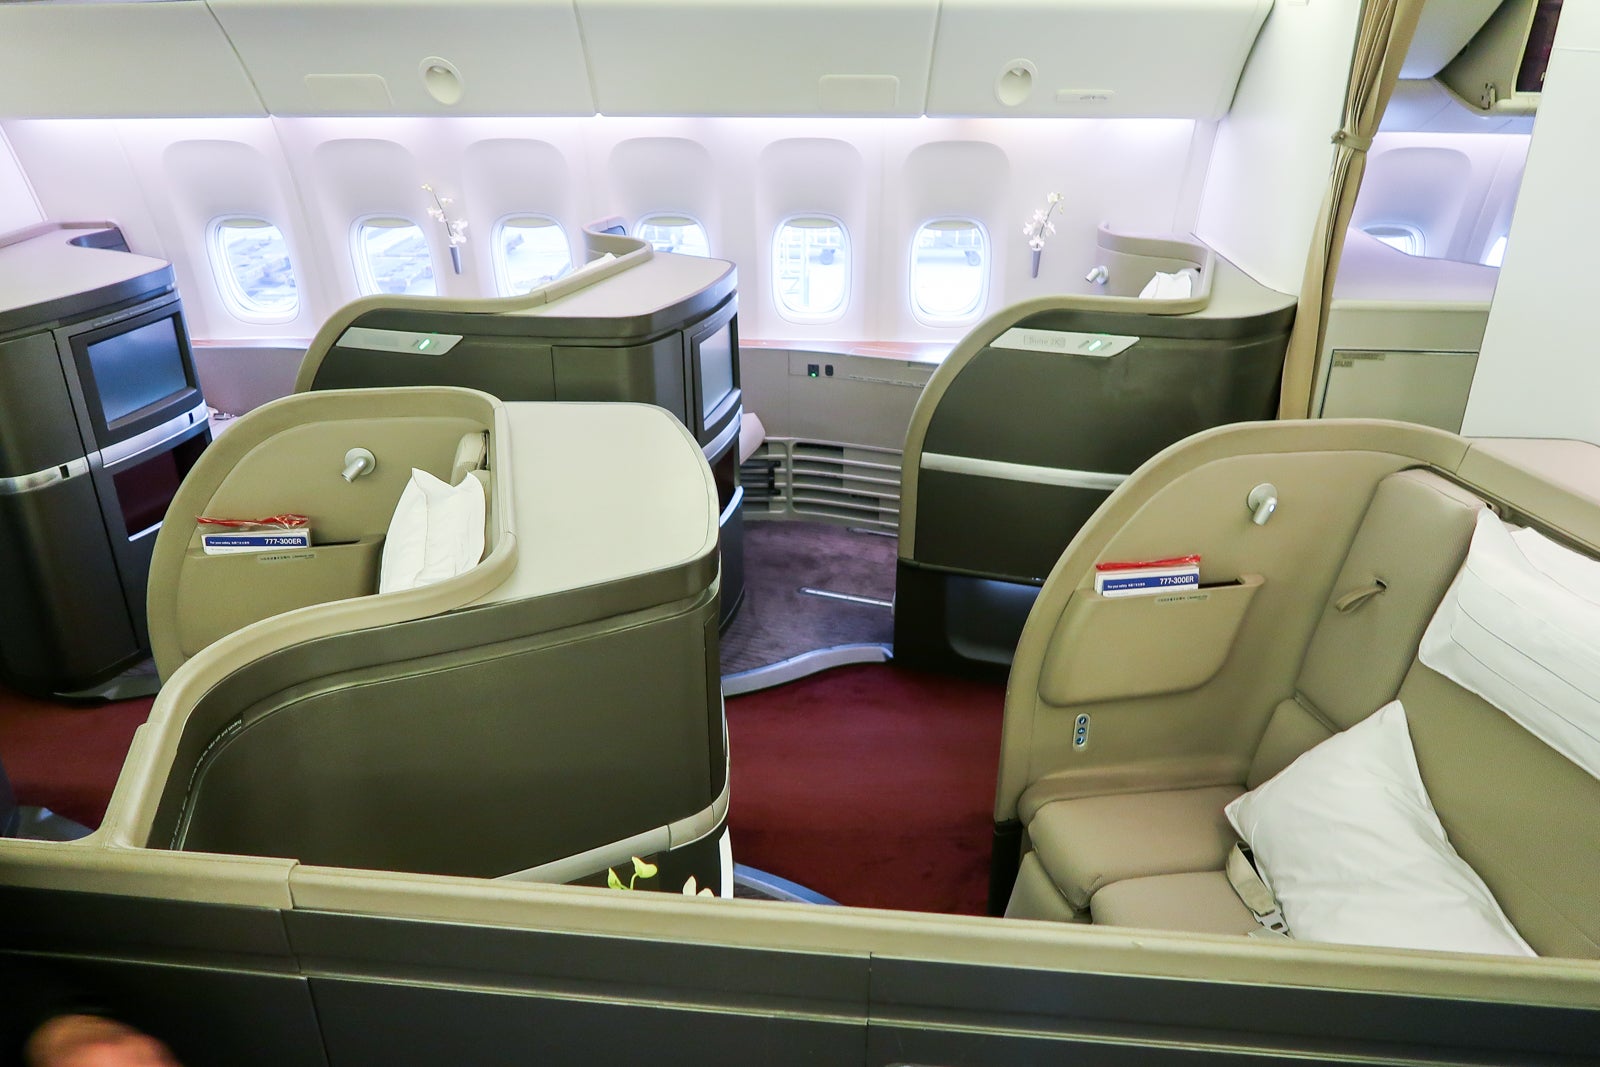 a first class airplane cabin before customers board